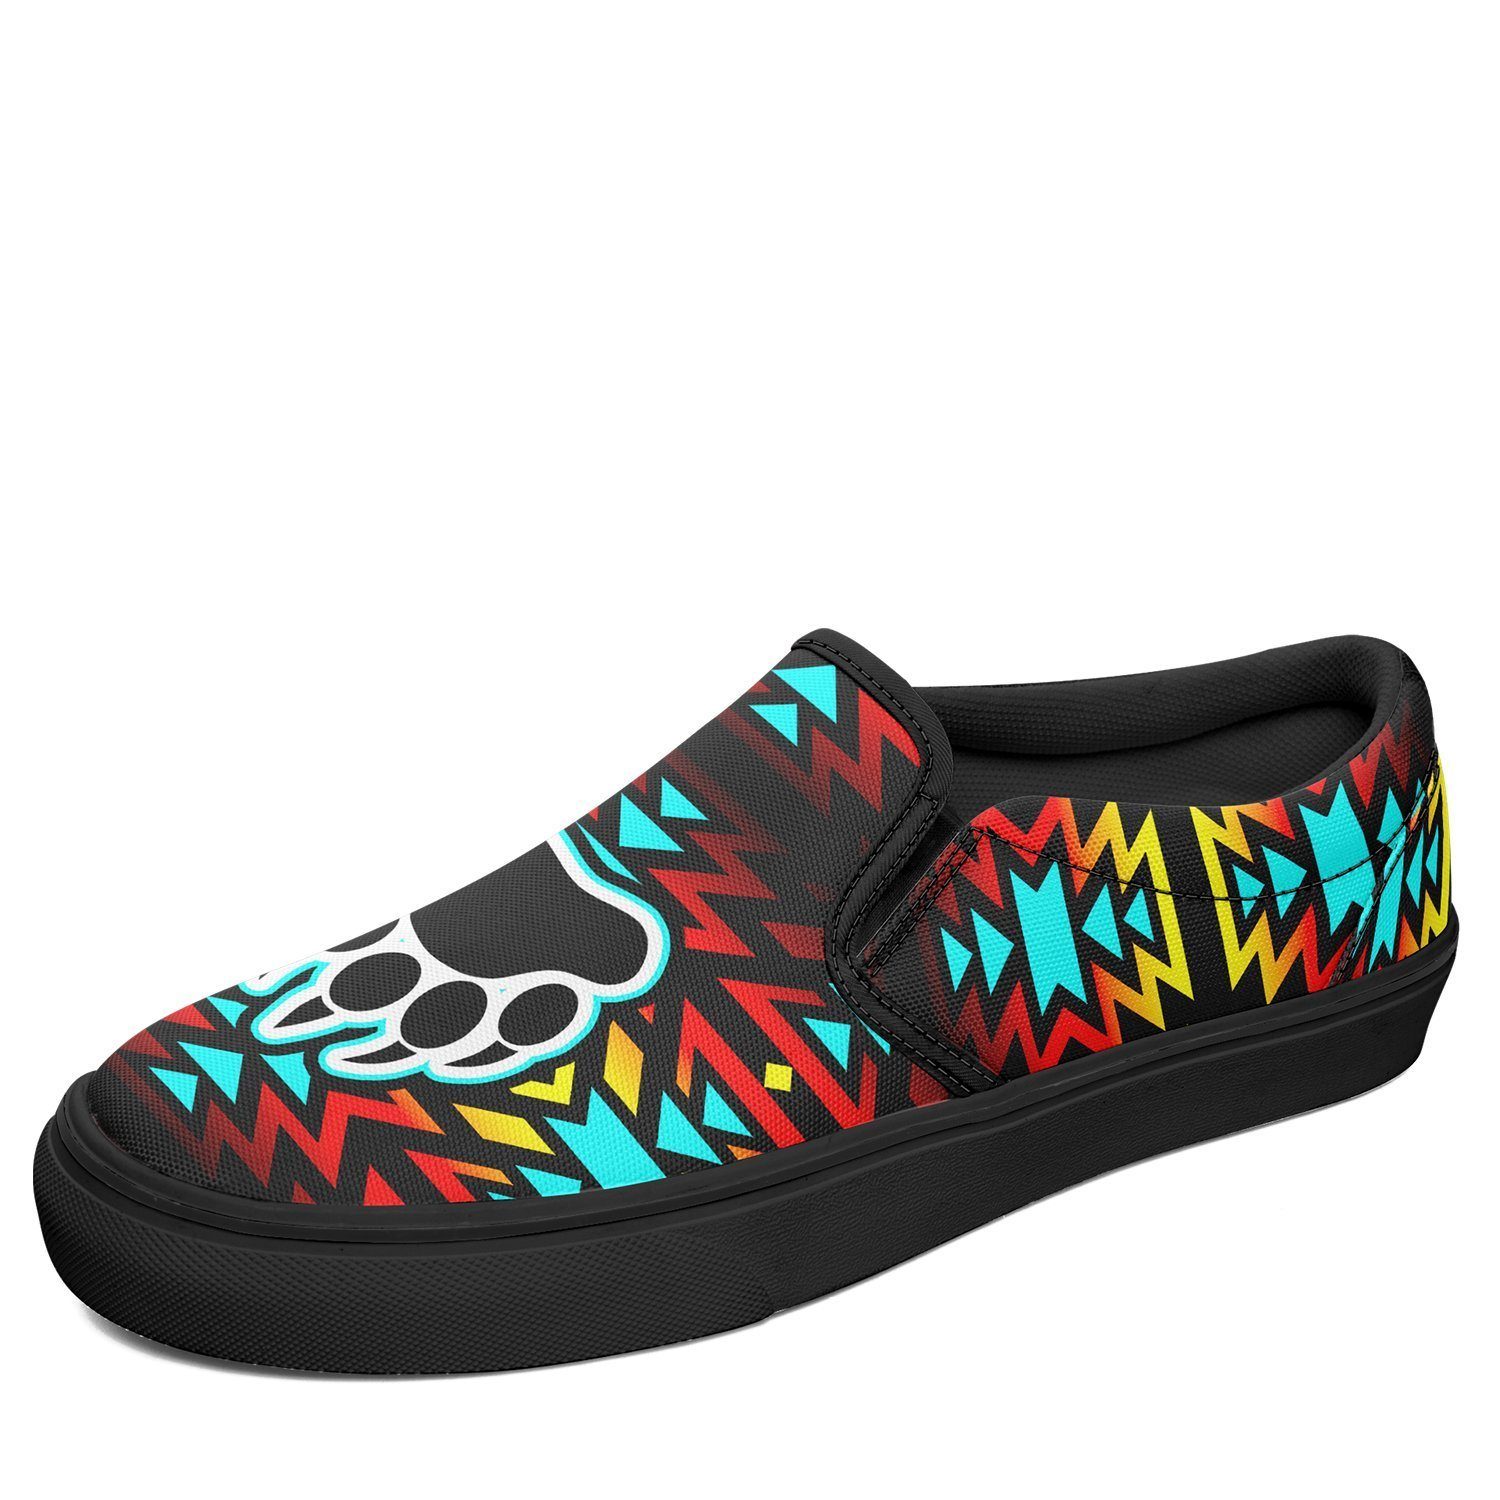 Fire Colors and Turquoise Bearpaw Otoyimm Kid's Canvas Slip On Shoes 49 Dzine US Youth 1 / EUR 32 Black Sole 